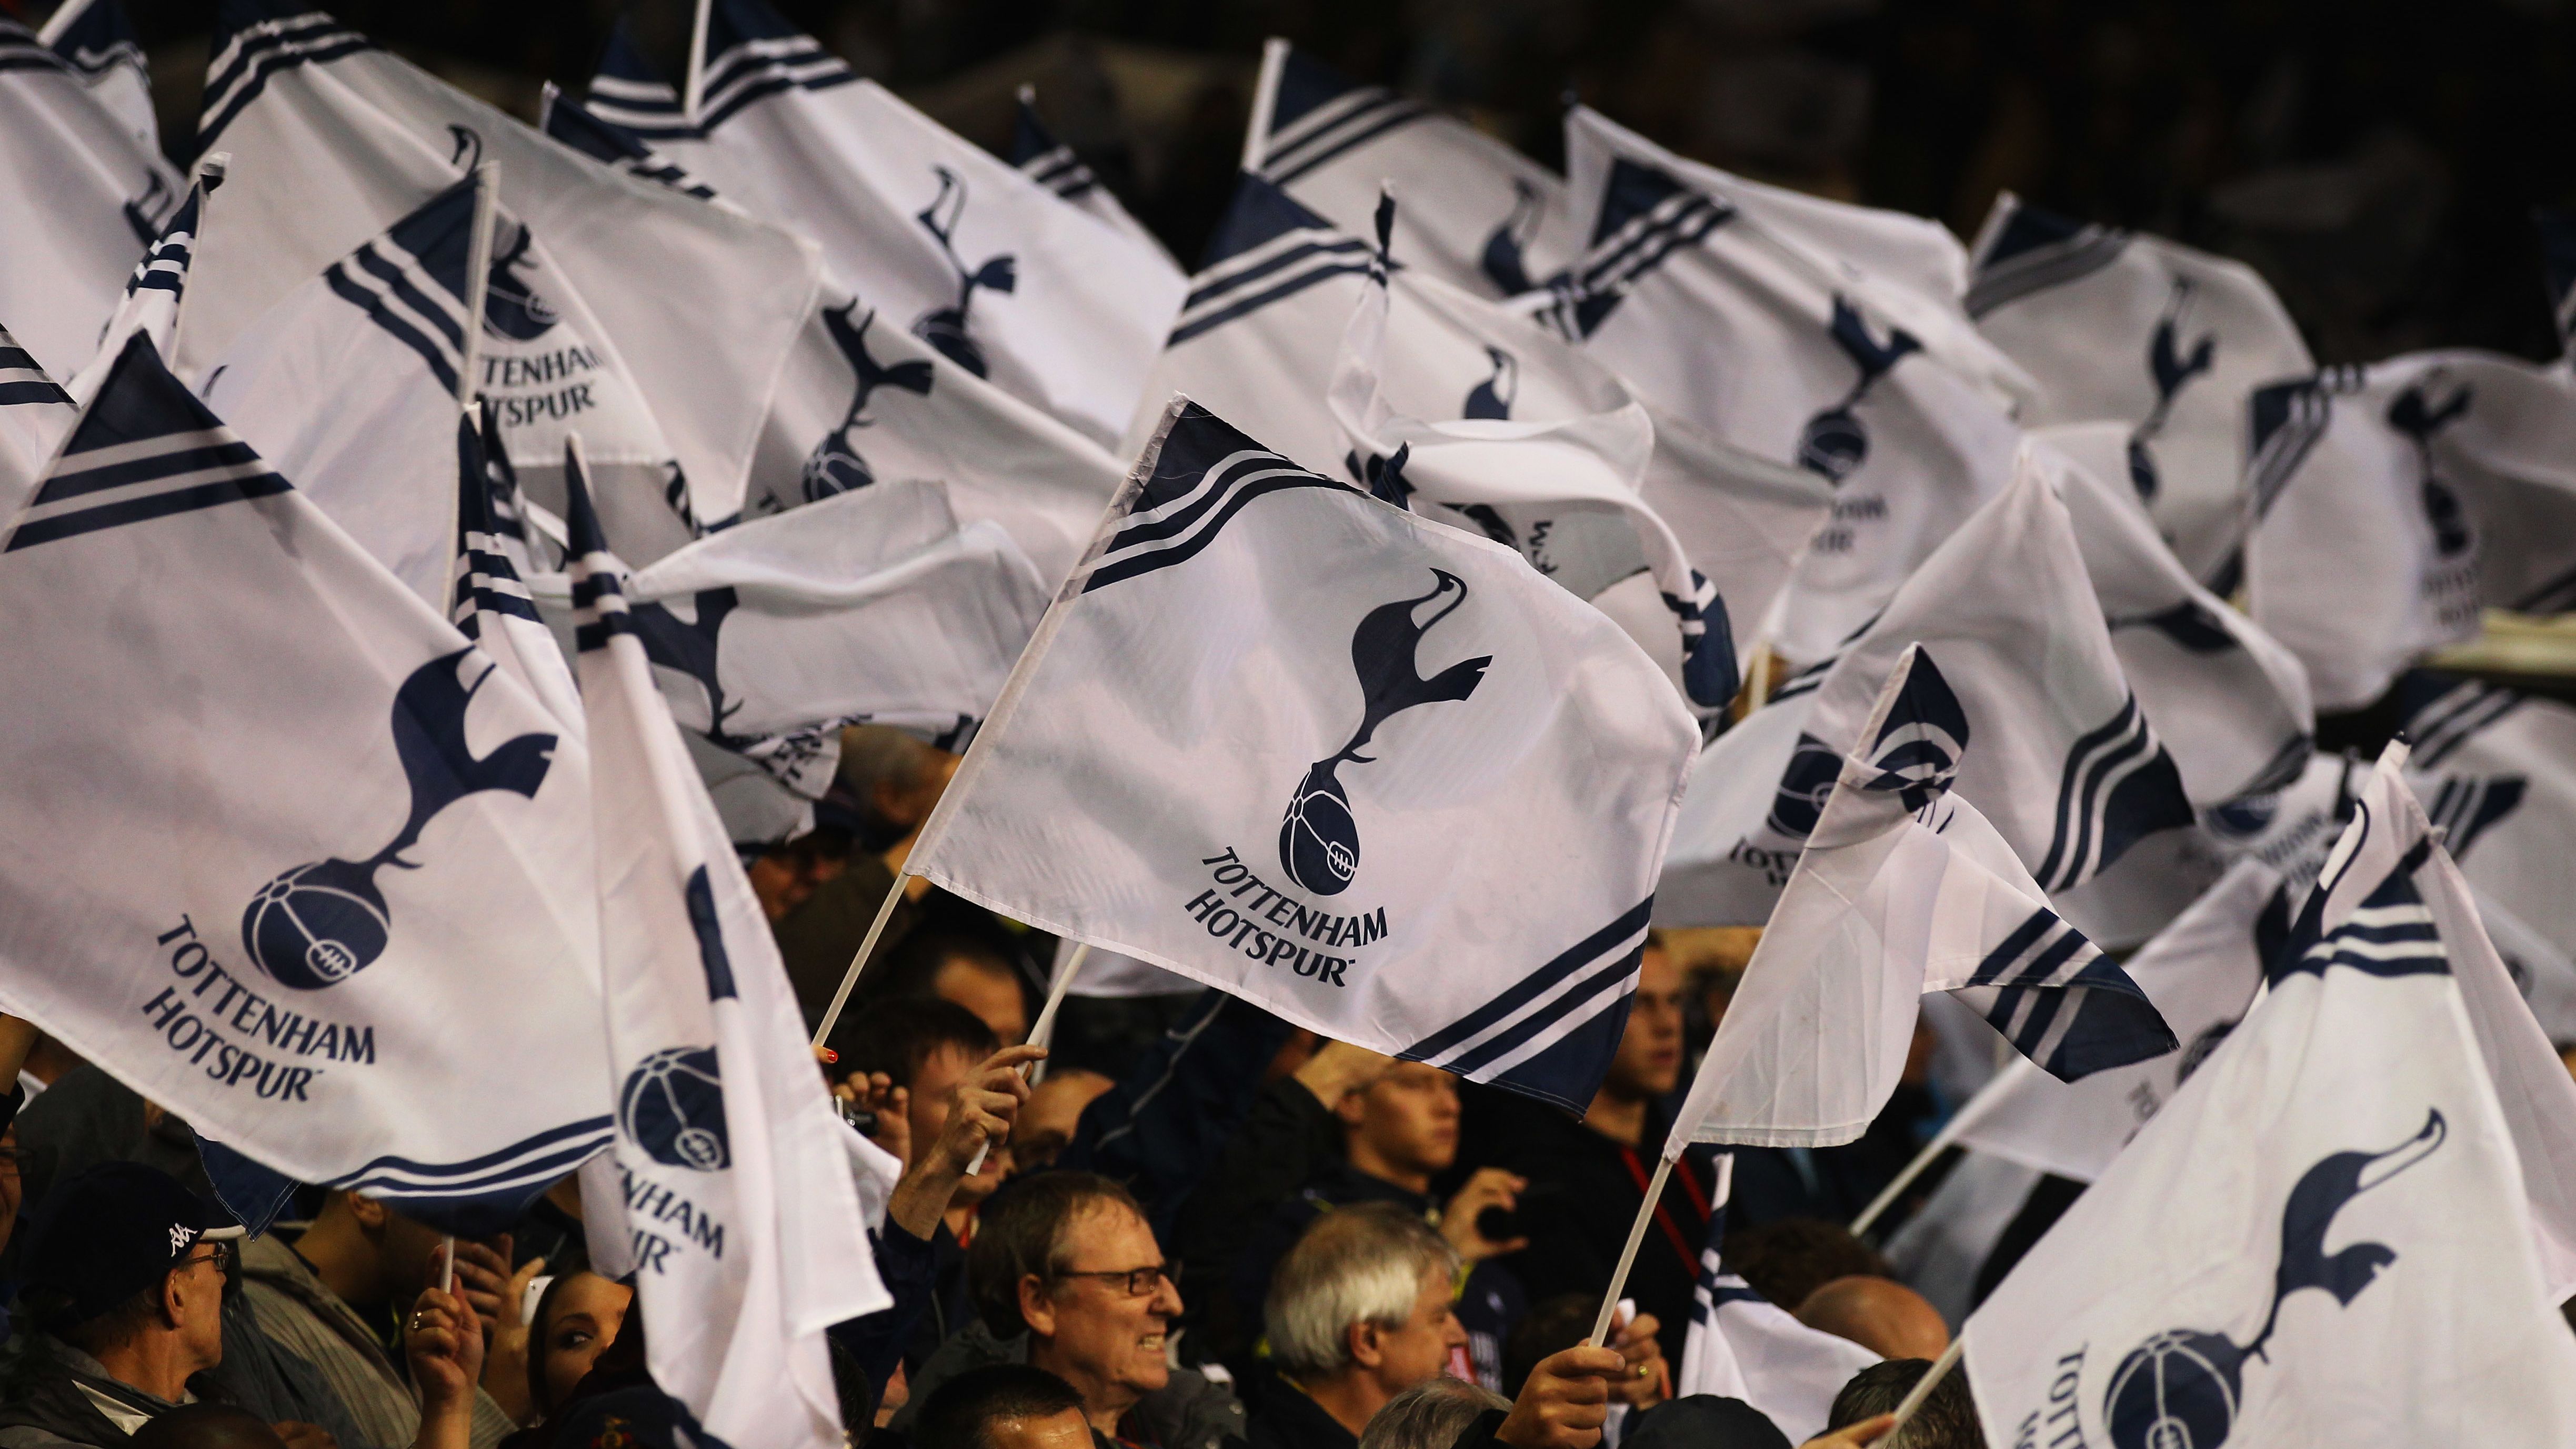 Tottenham Hotspur fans have seen the term "Yid" used as a discriminatory term against them.